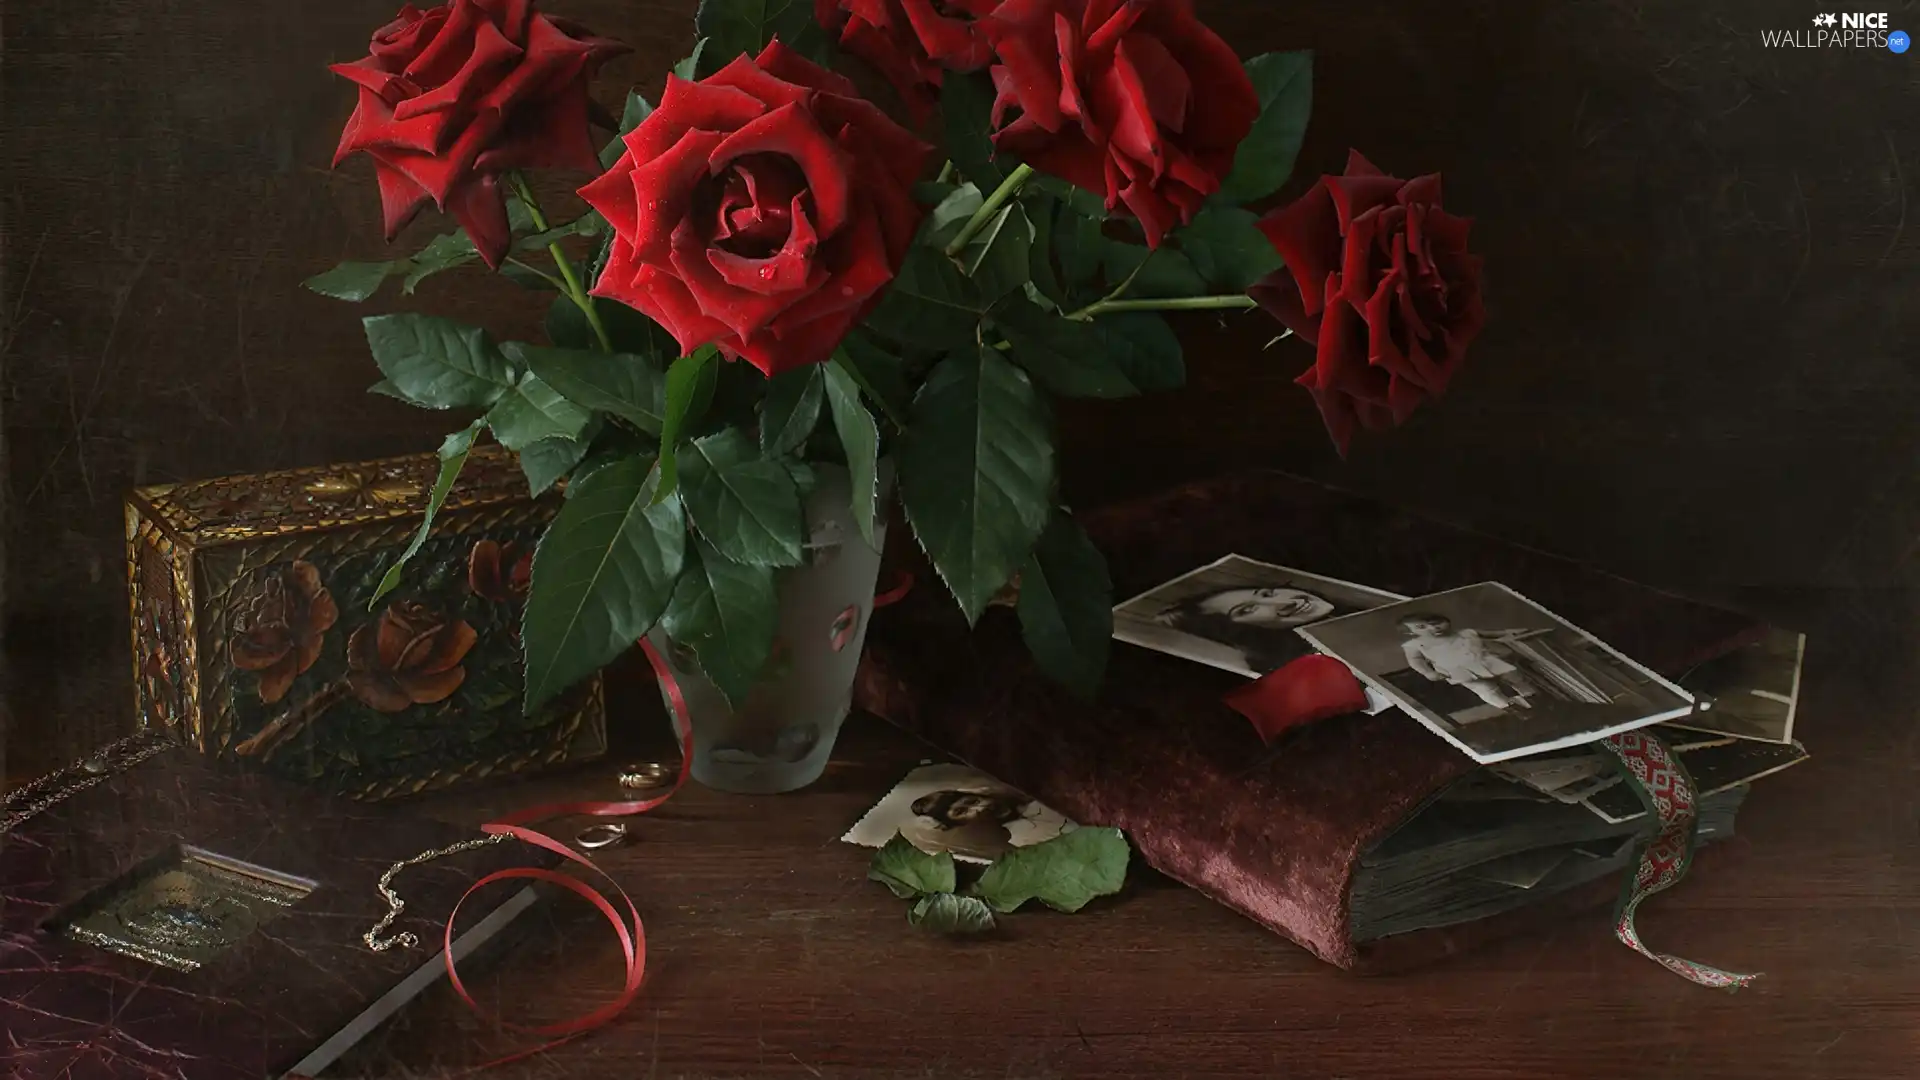 roses, Vase, albums, photos, old, Red